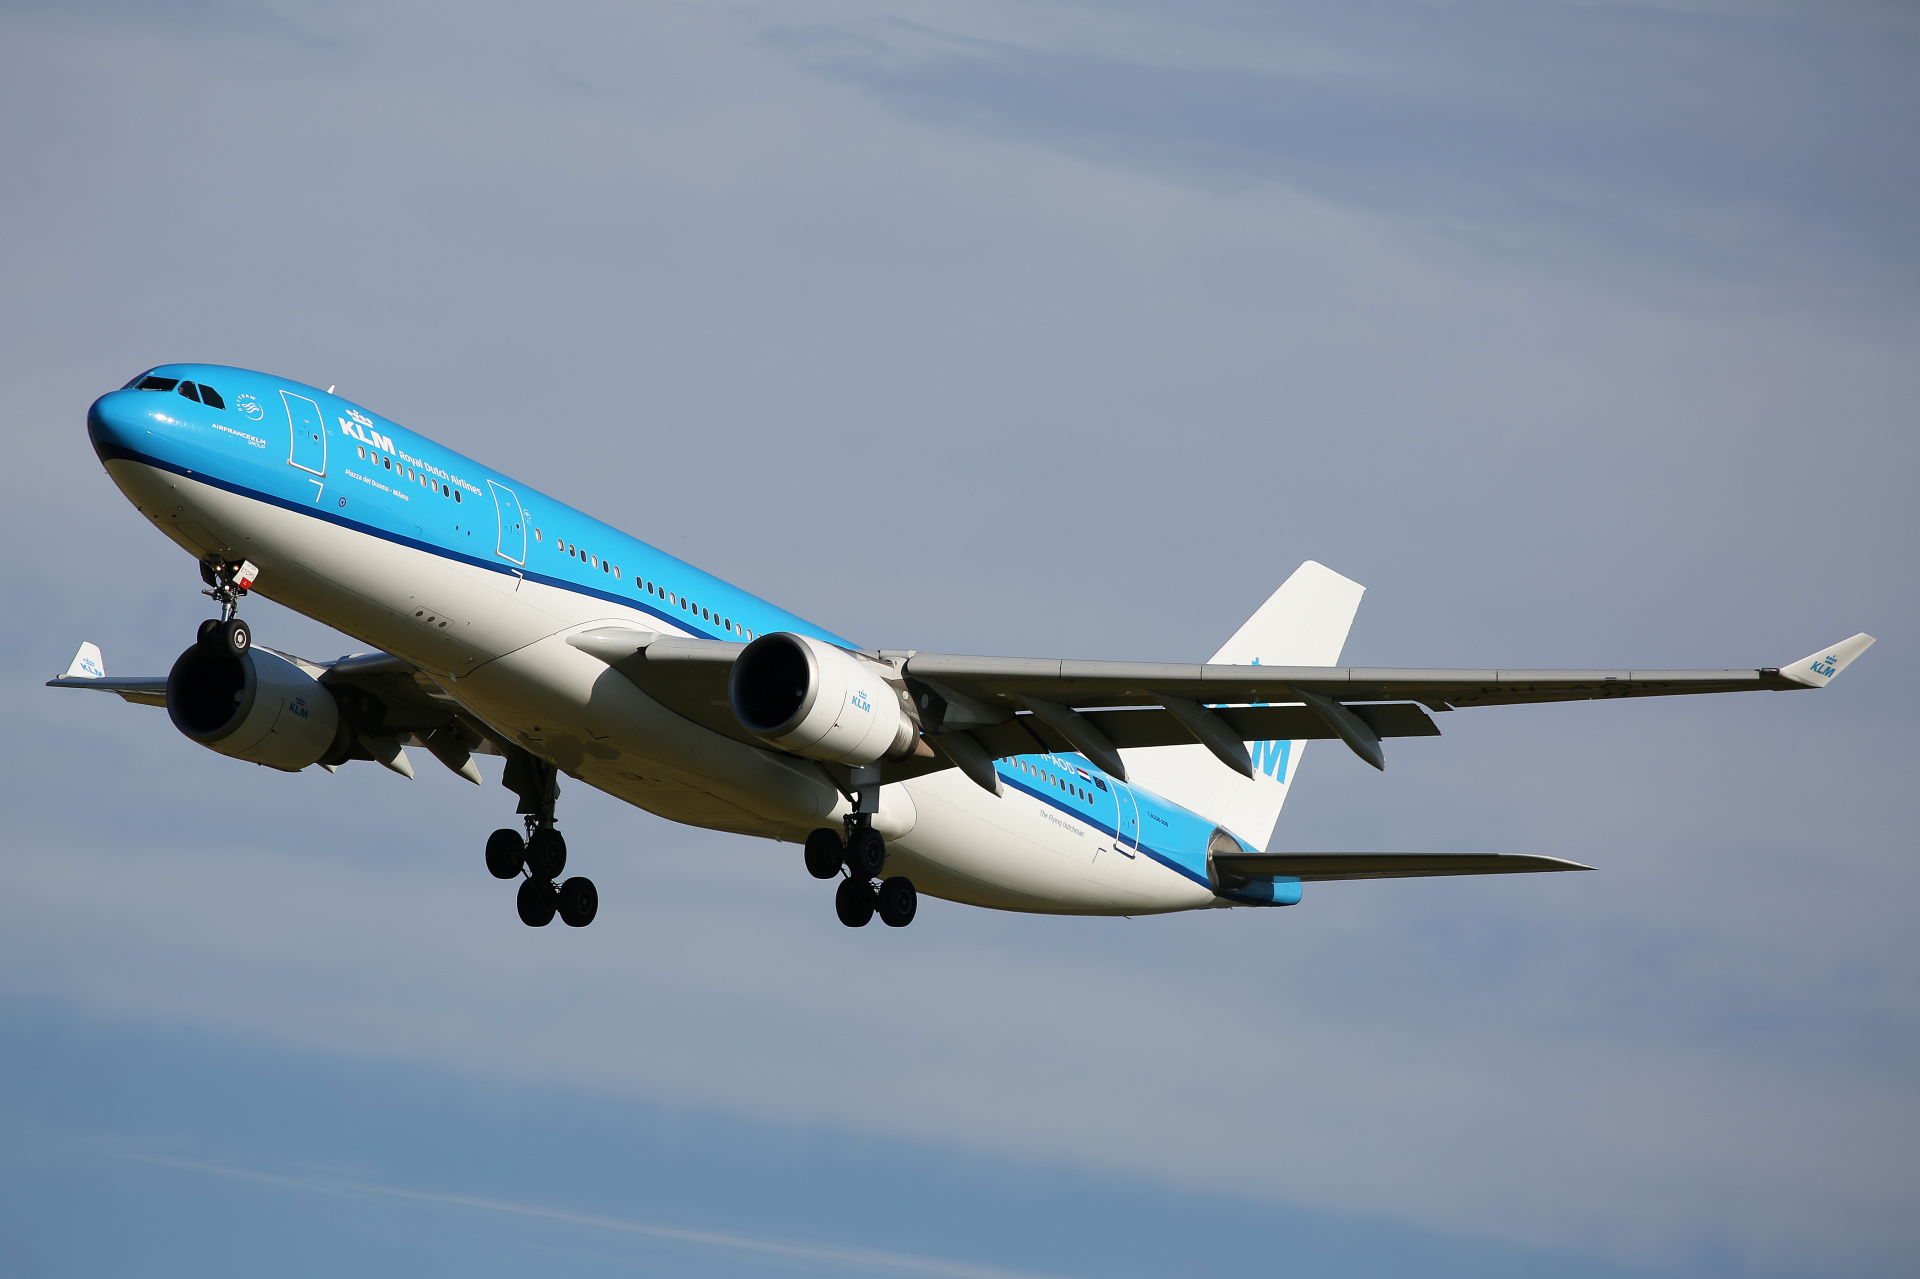 PH-AOD (Aircraft » Schiphol Spotting » Airbus A330-200 » KLM Royal Dutch Airlines)